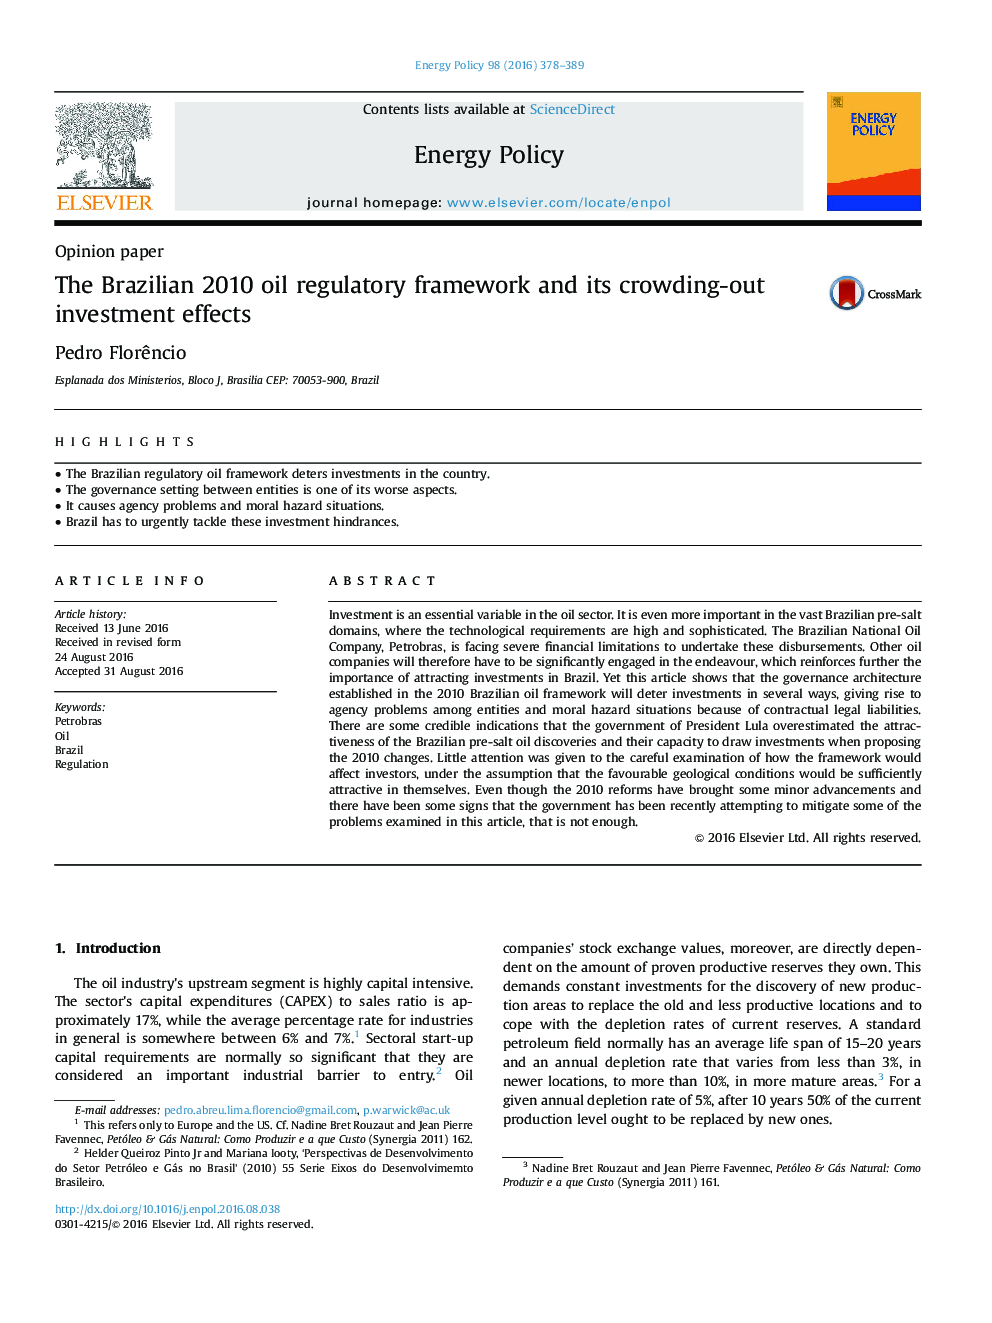 The Brazilian 2010 oil regulatory framework and its crowding-out investment effects